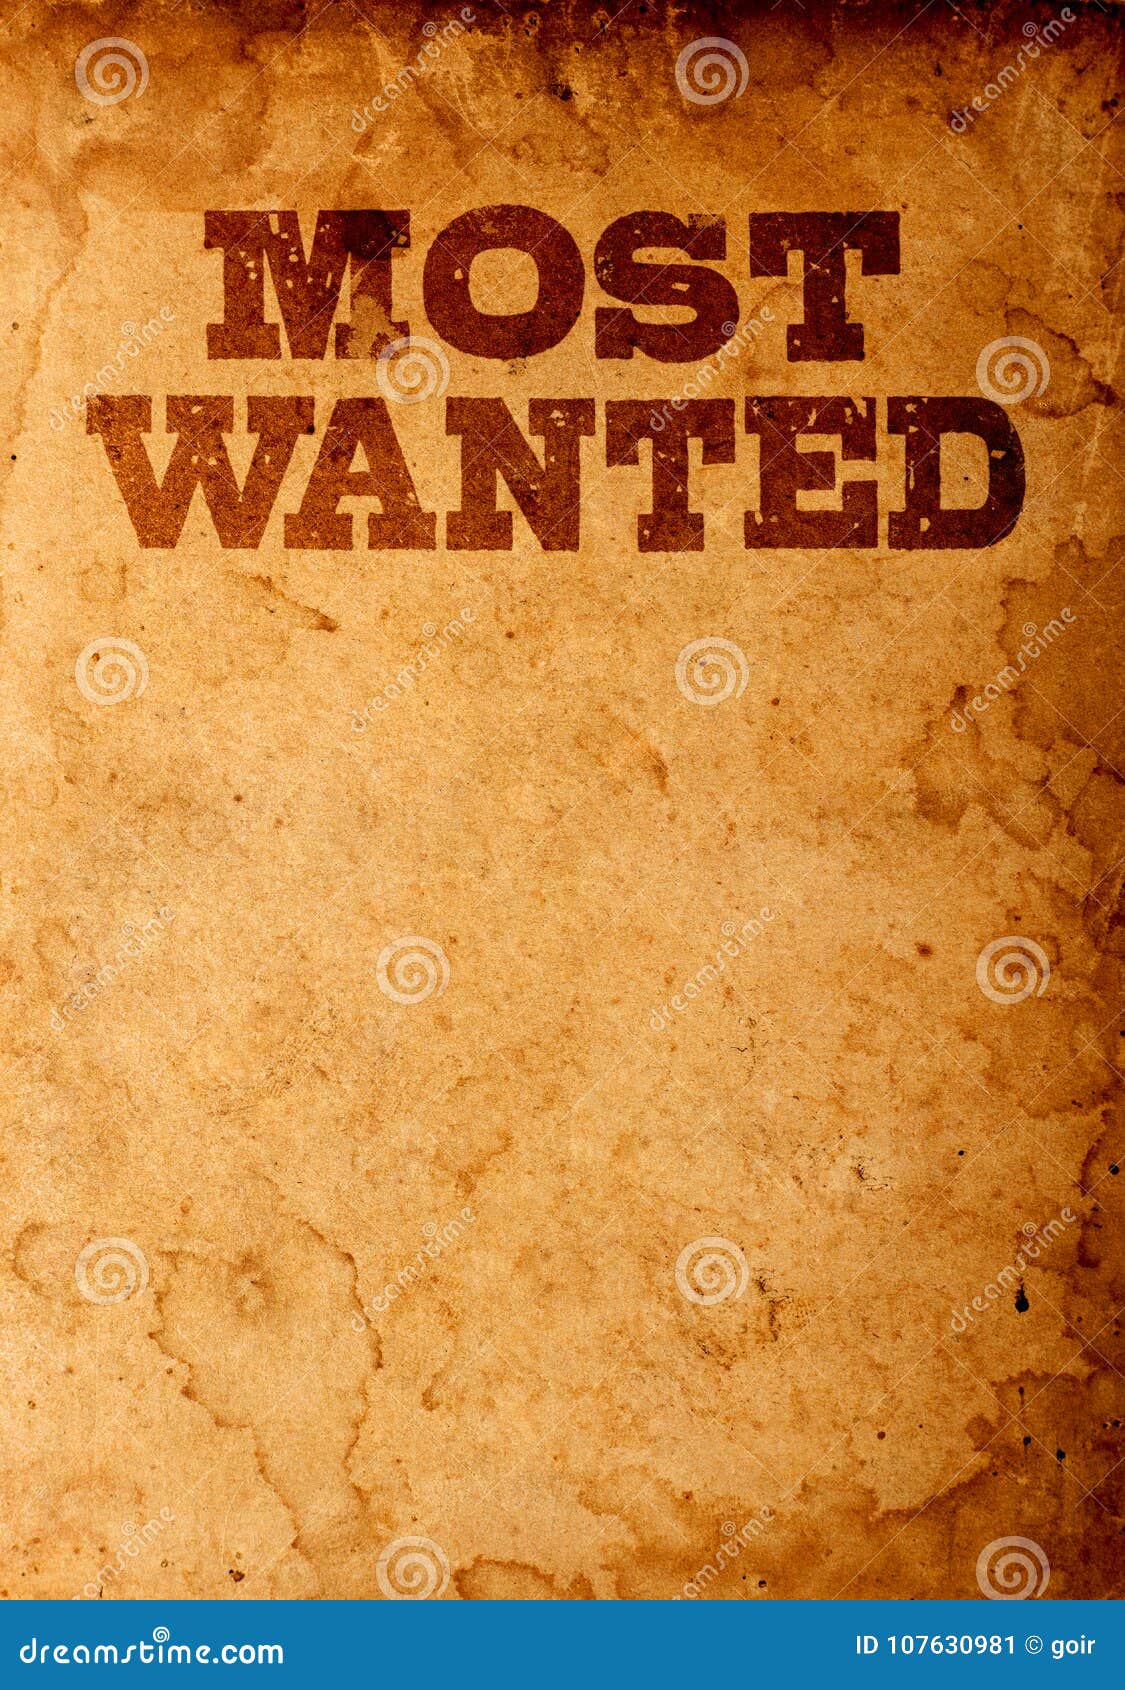 Most wanted poster stock image. Image of effect, direction - 107630981